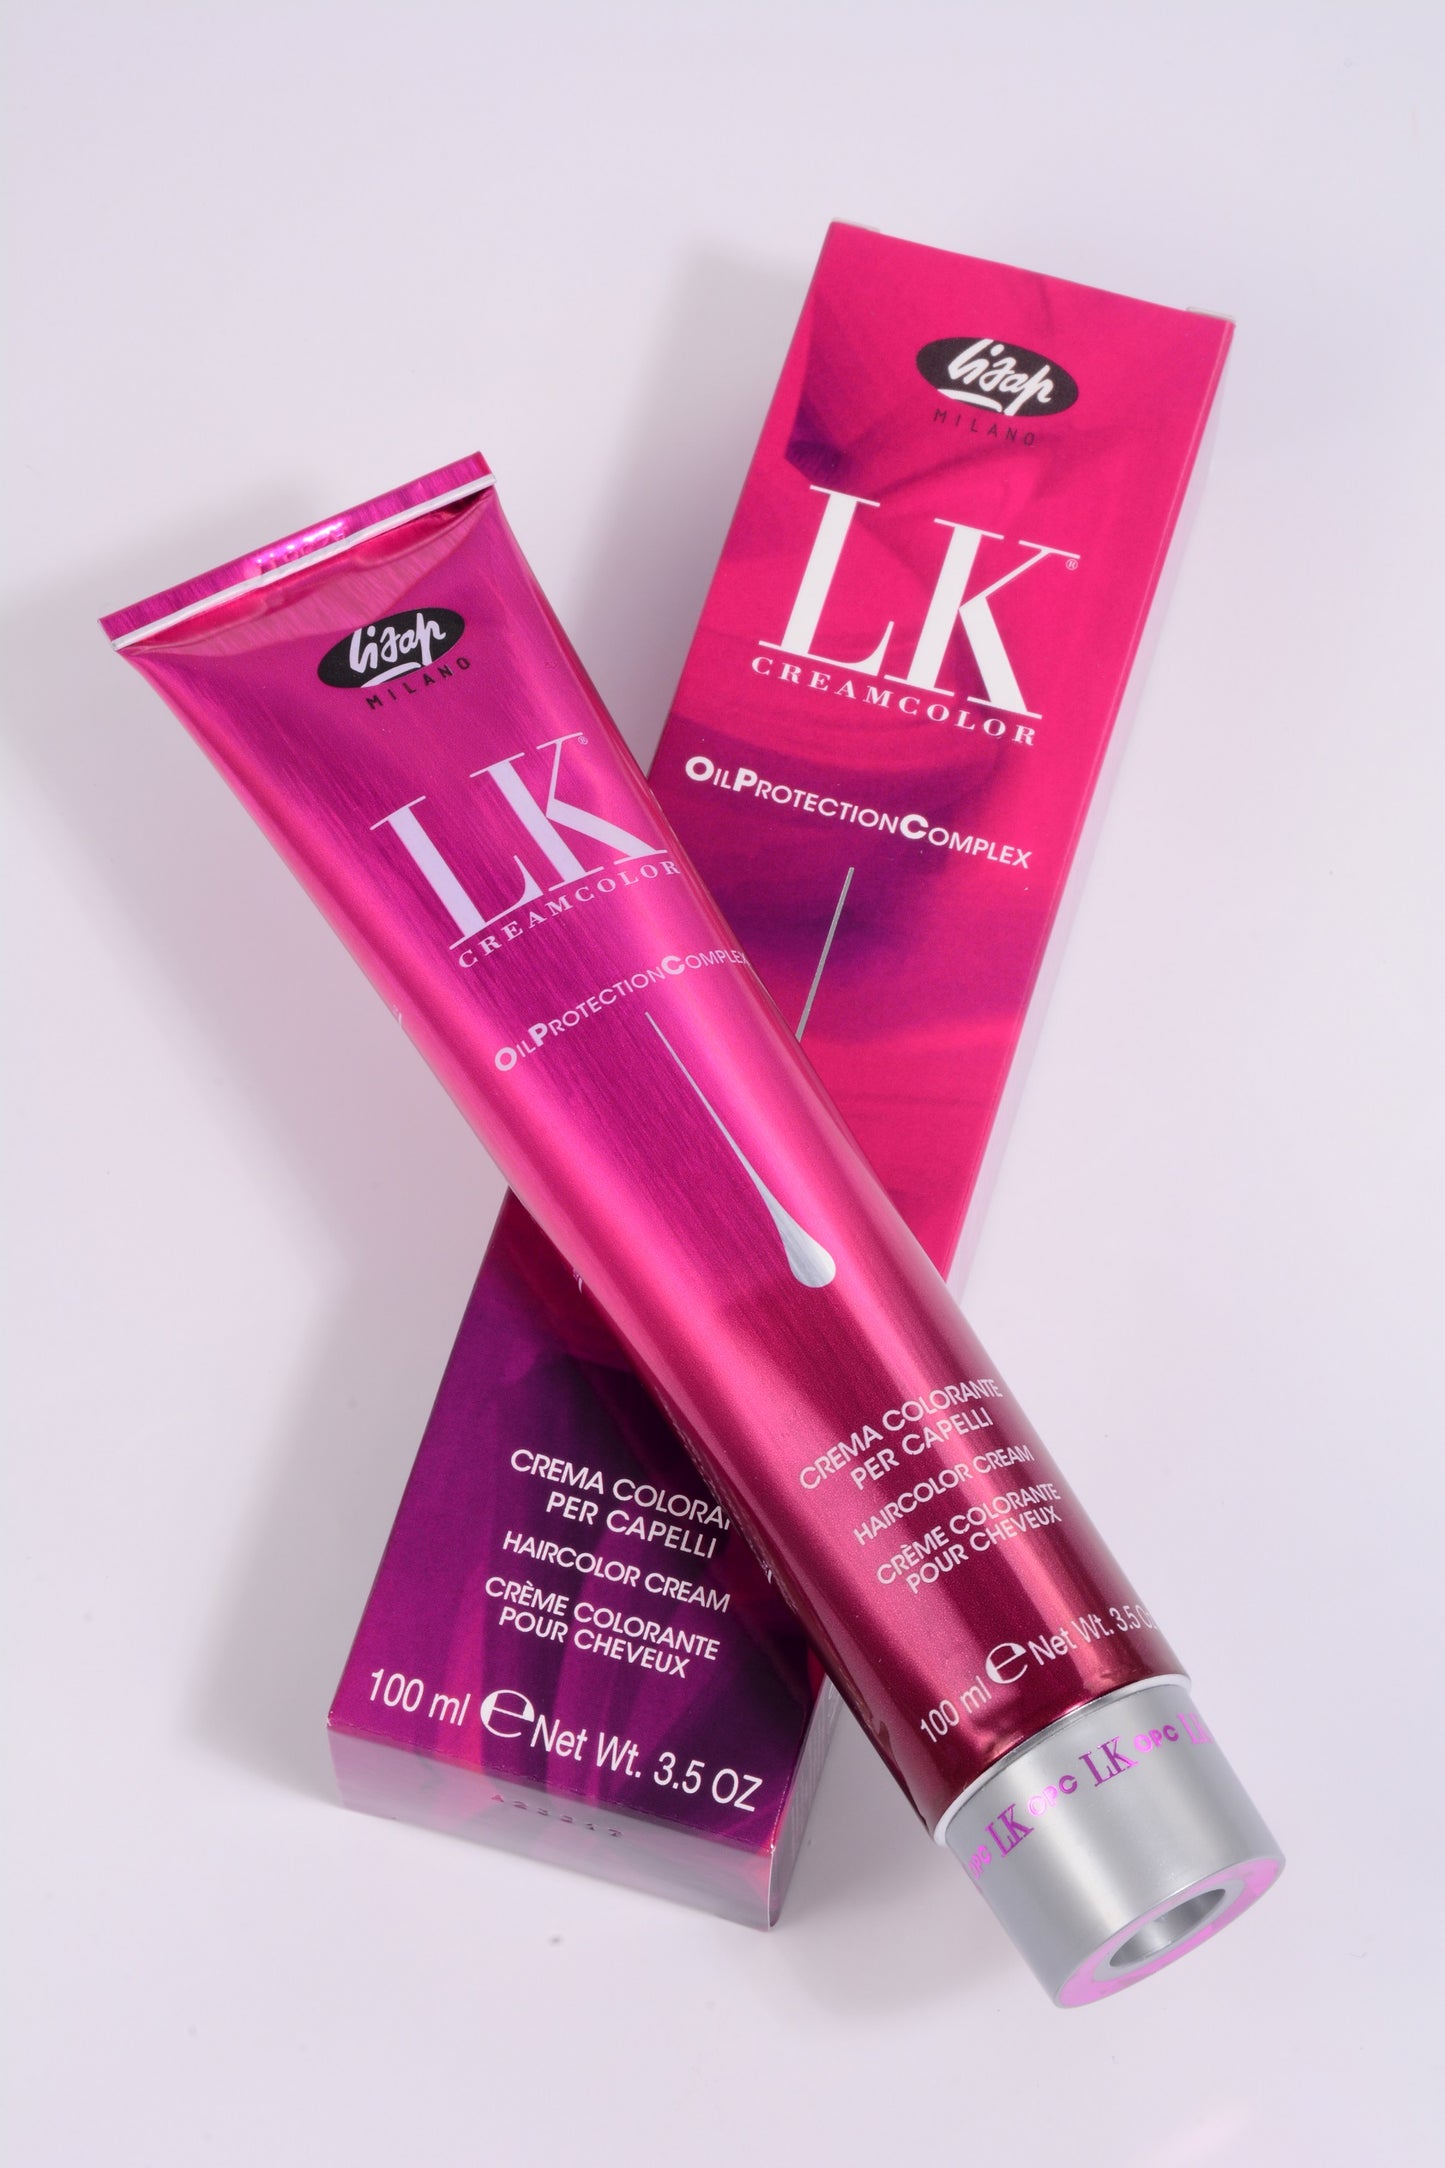 LK Creamcolor 6/4 Oil Protection Complex